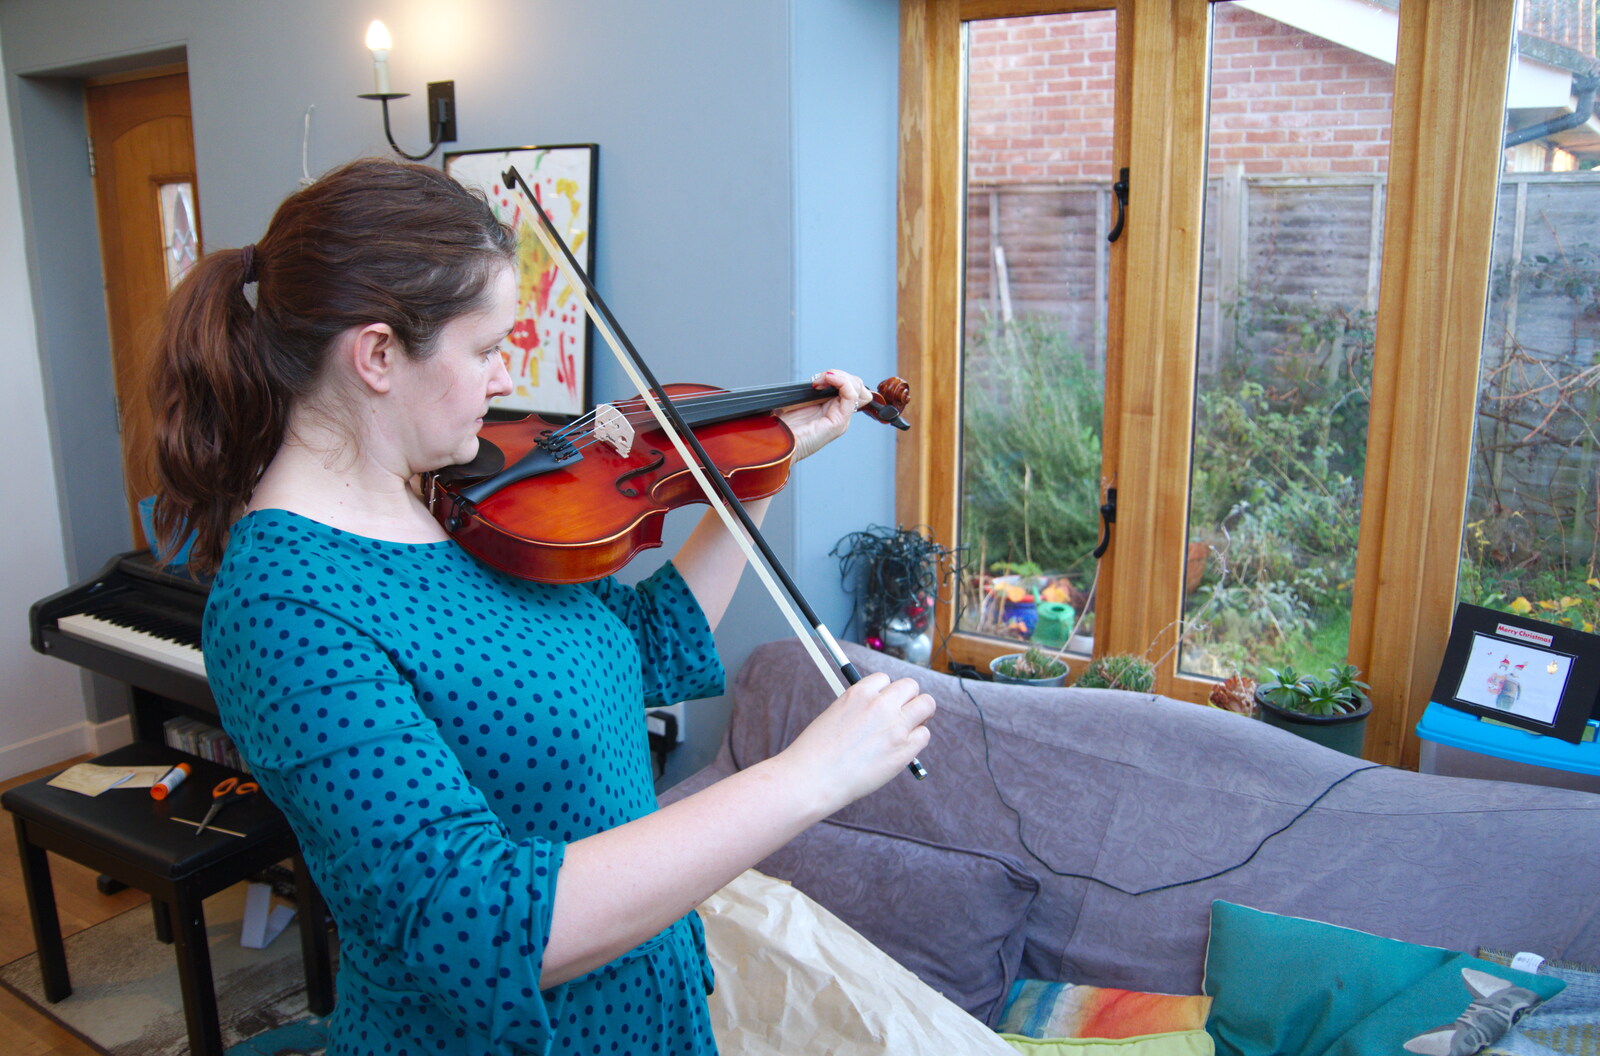 Isobel gets a violin for Christmas from Christmas Day, Brome, Suffolk - 25th December 2019